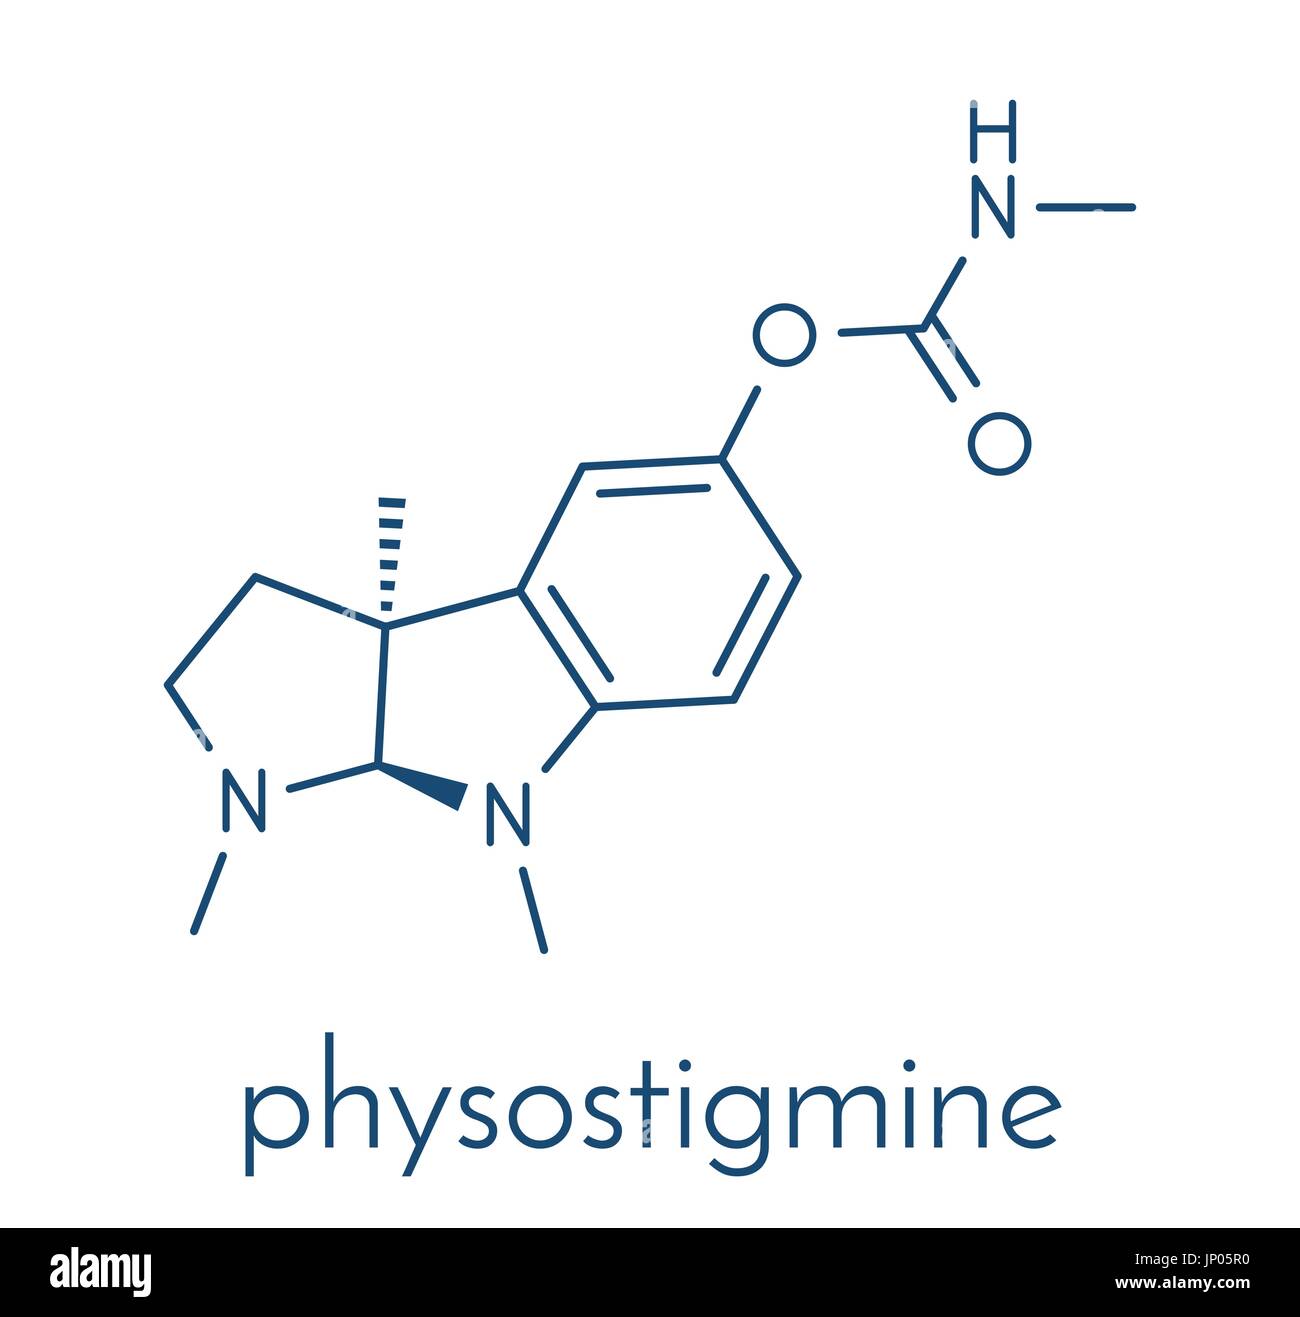 Physostigmine alkaloid molecule. Present in calabar bean and manchineel tree, acts as acetylcholinesterase inhibitor. Skeletal formula. Stock Vector